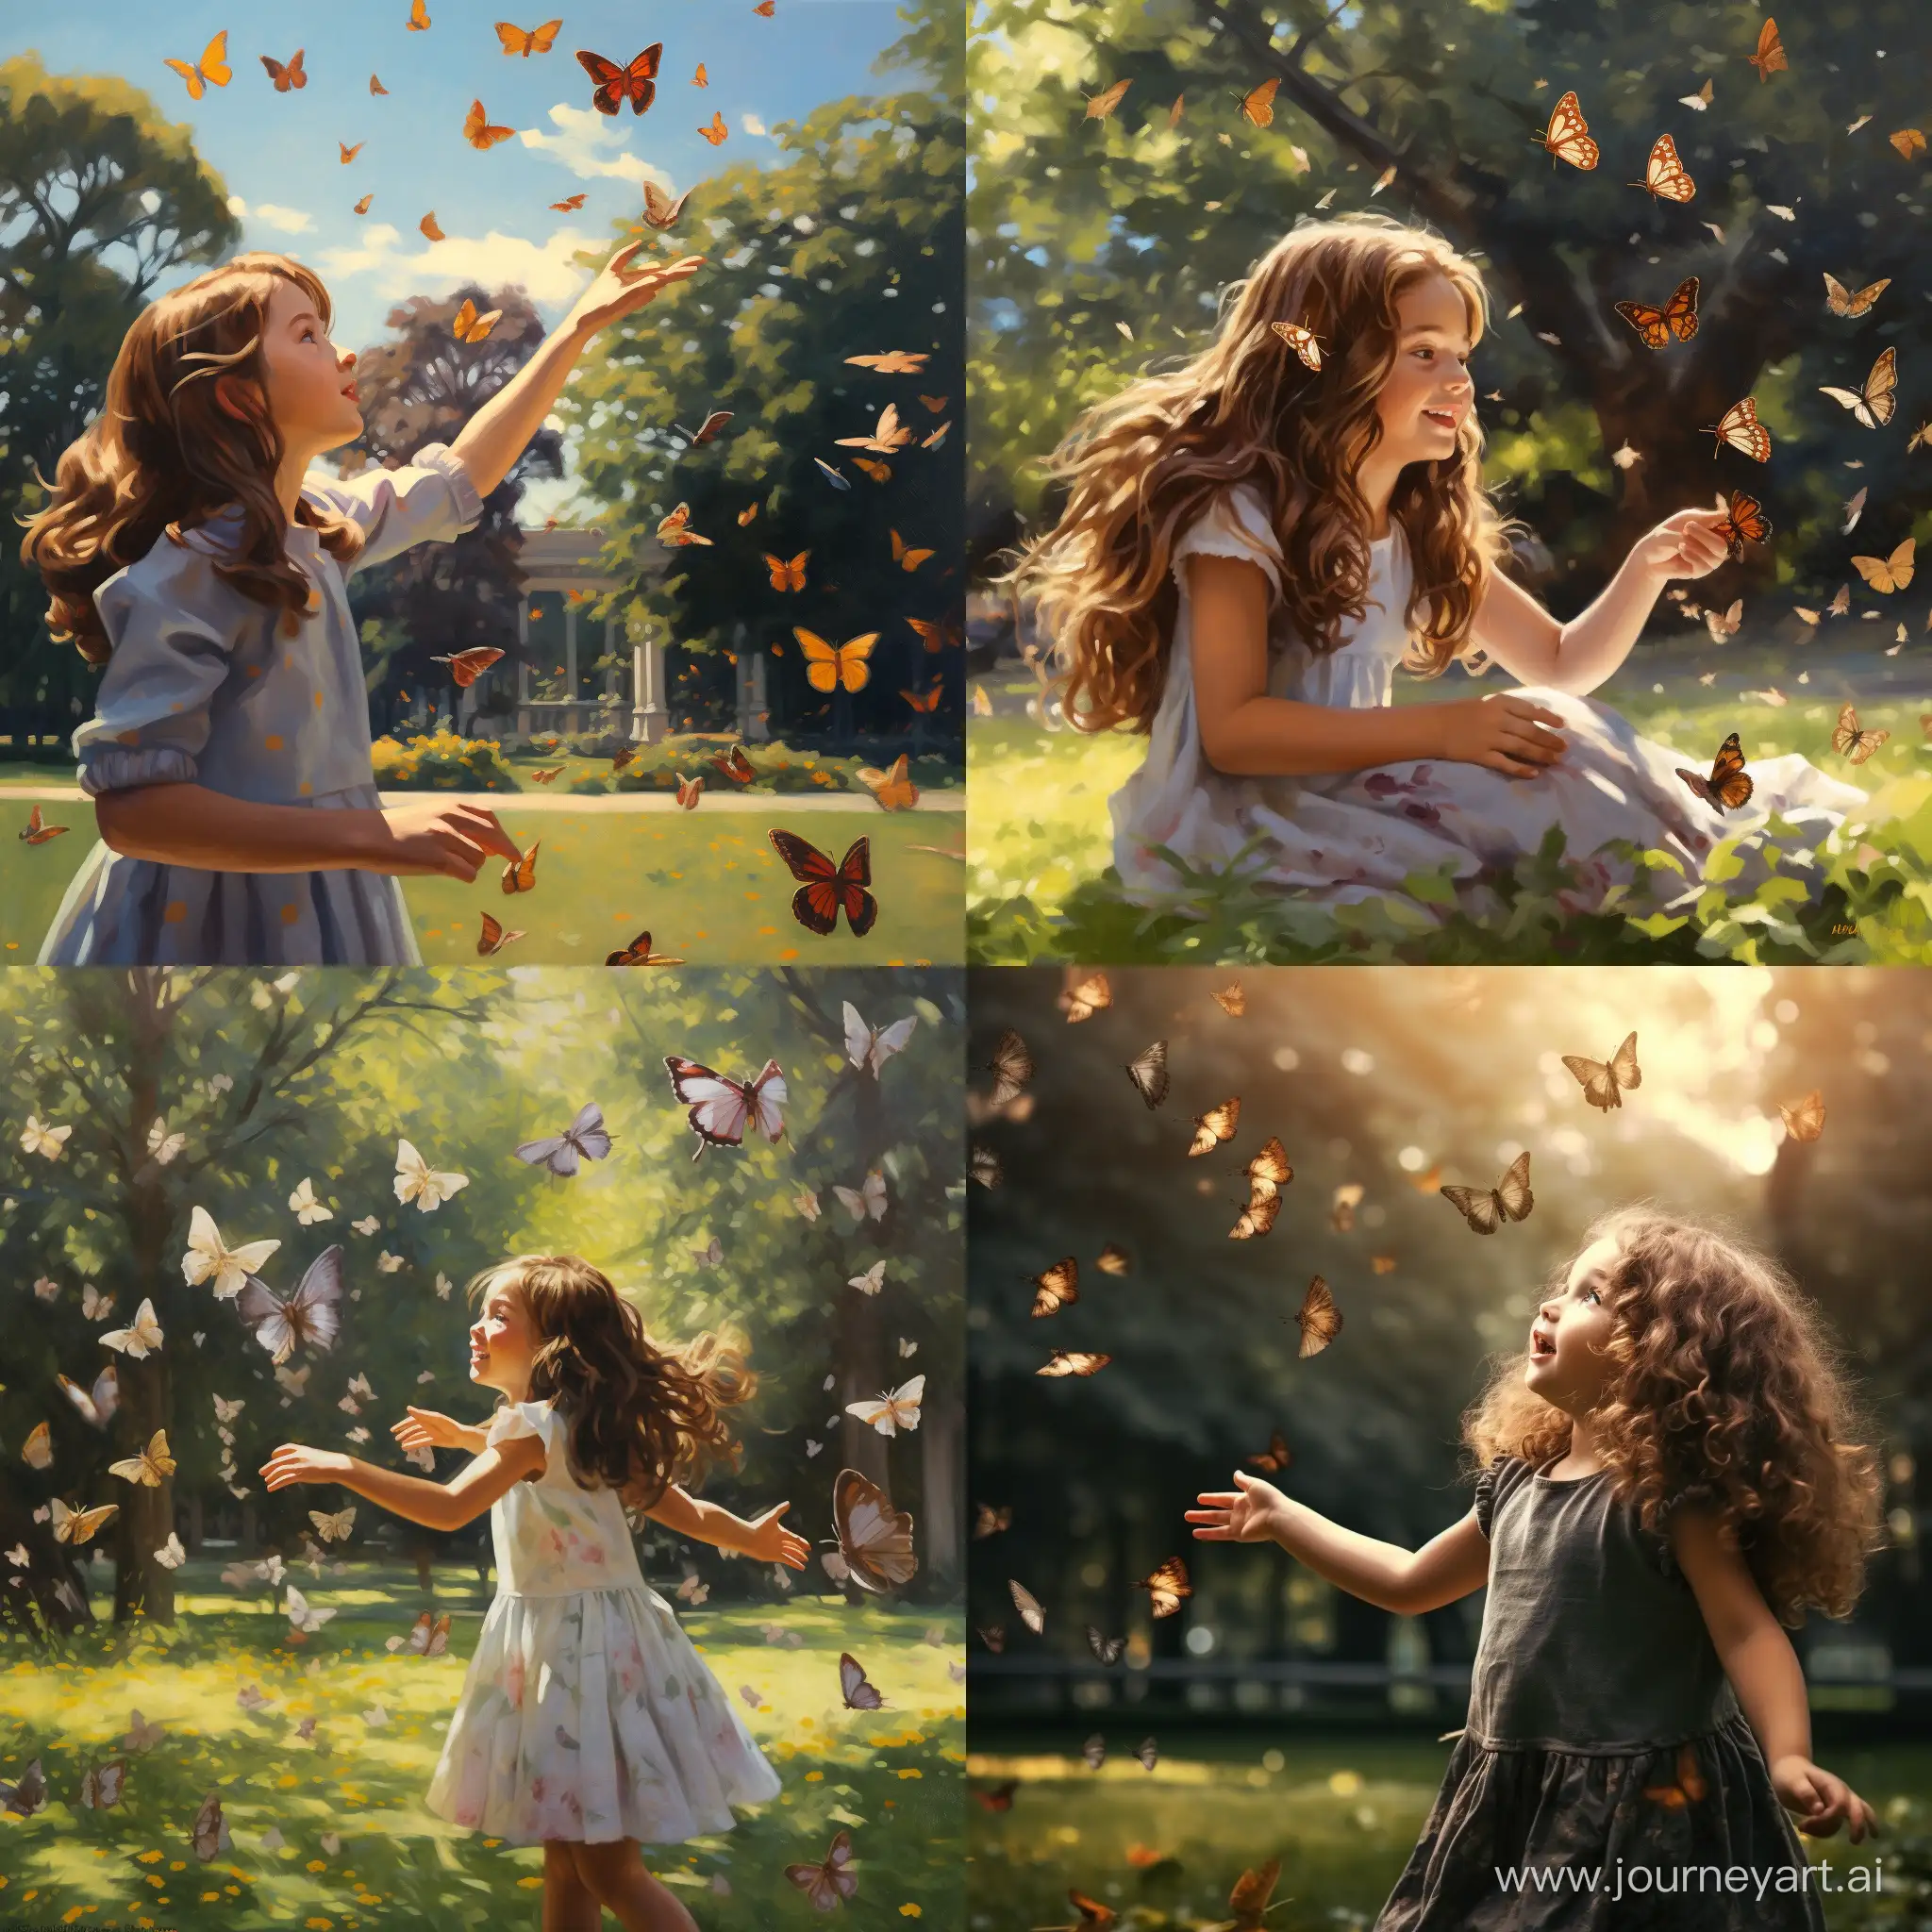 Young-Girl-Capturing-Butterflies-in-a-Serene-Park-Setting